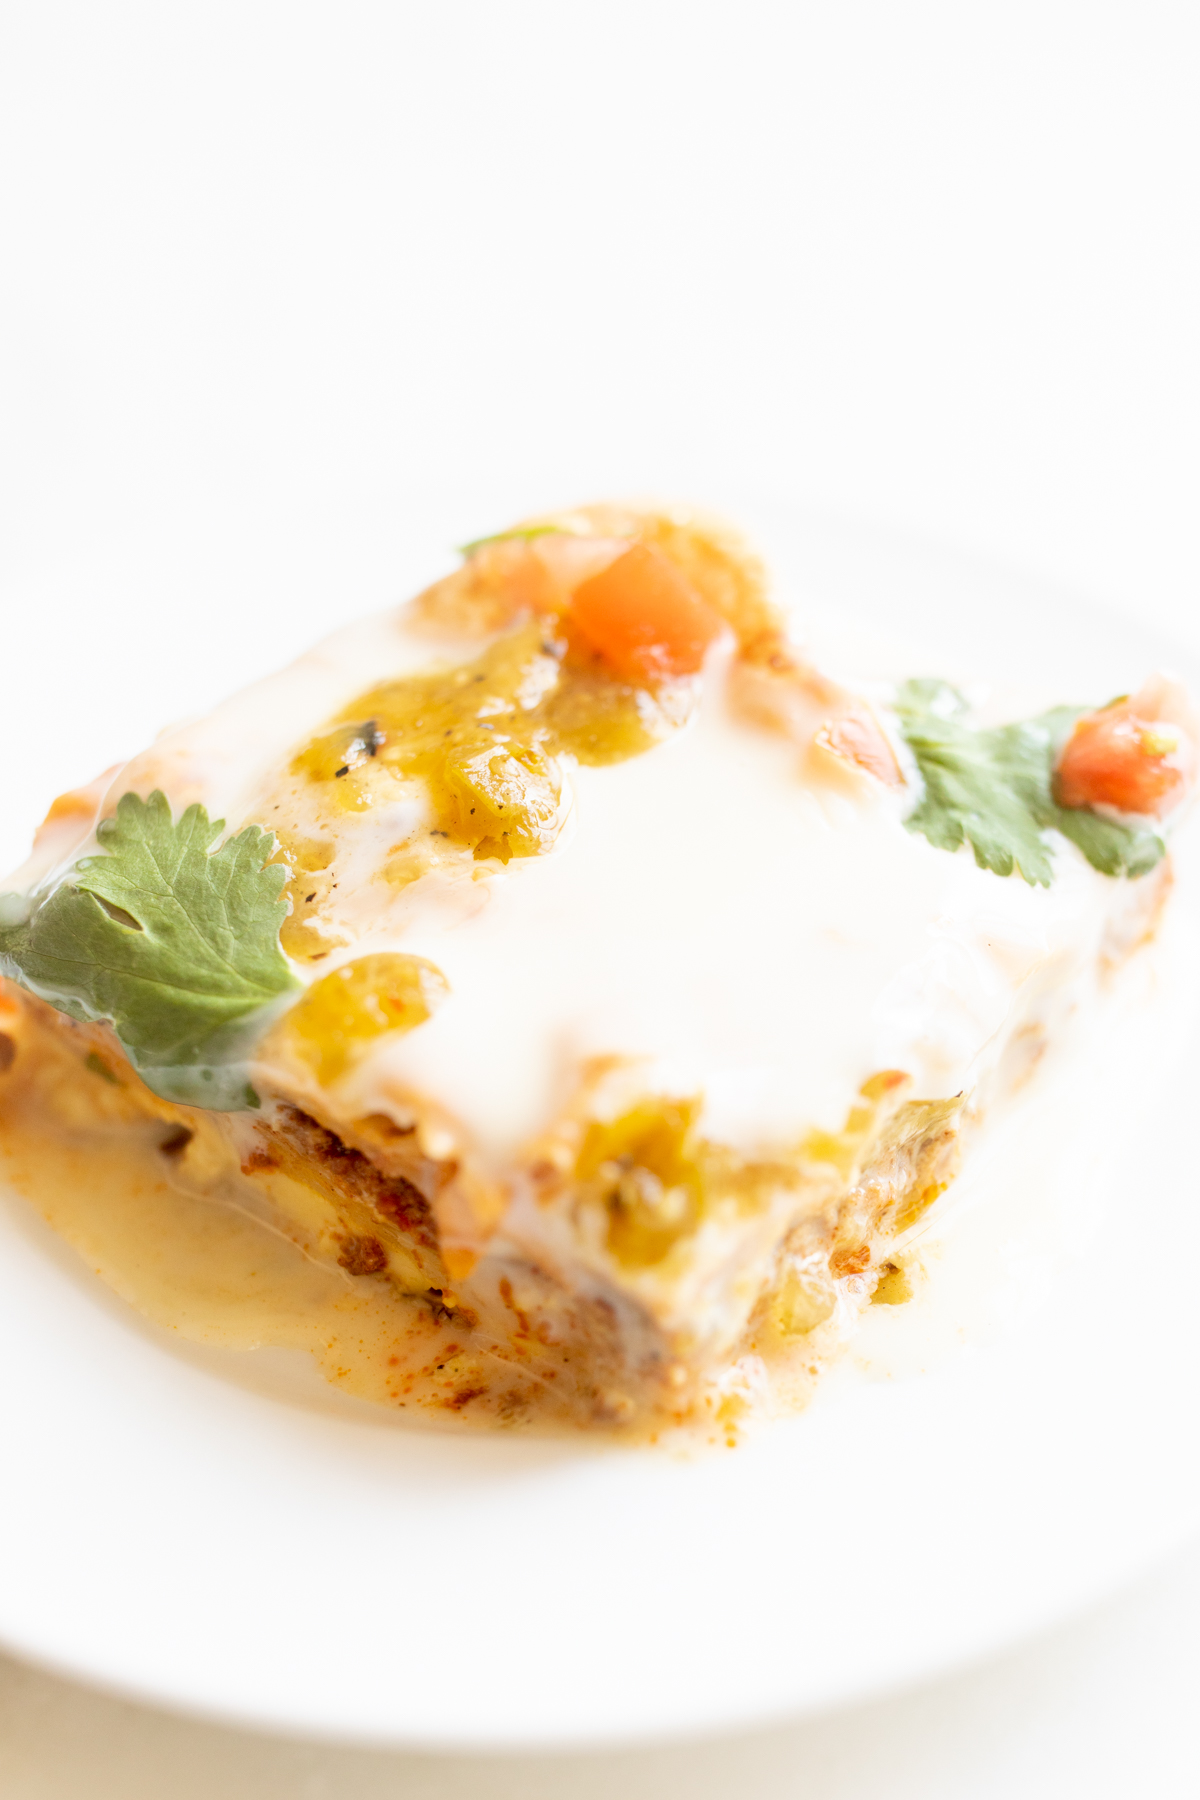 A slice of Mexican breakfast casserole on a white plate.